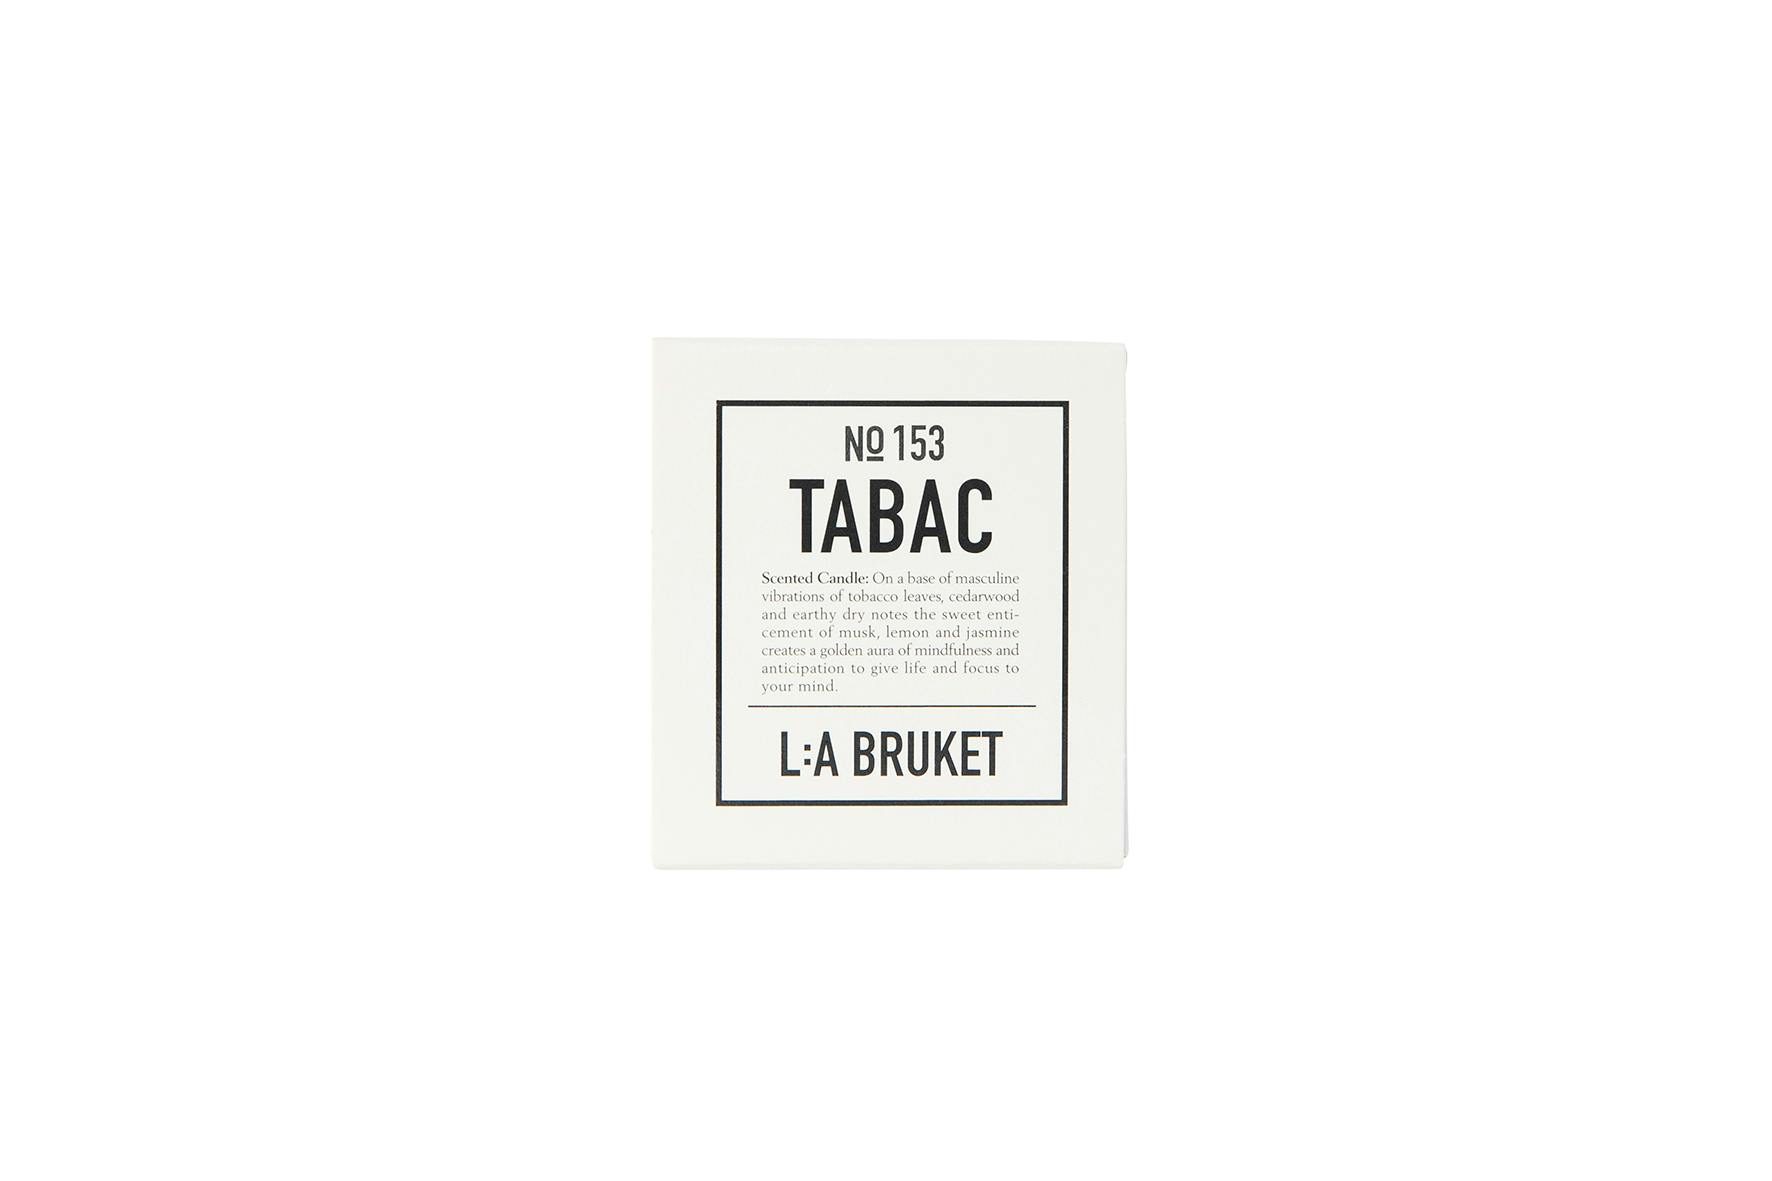 L:A Bruket candle, fireside candles. vegan candle, Tabac, tobacco fragrance natural candles, organic, Nordic style, travel candle